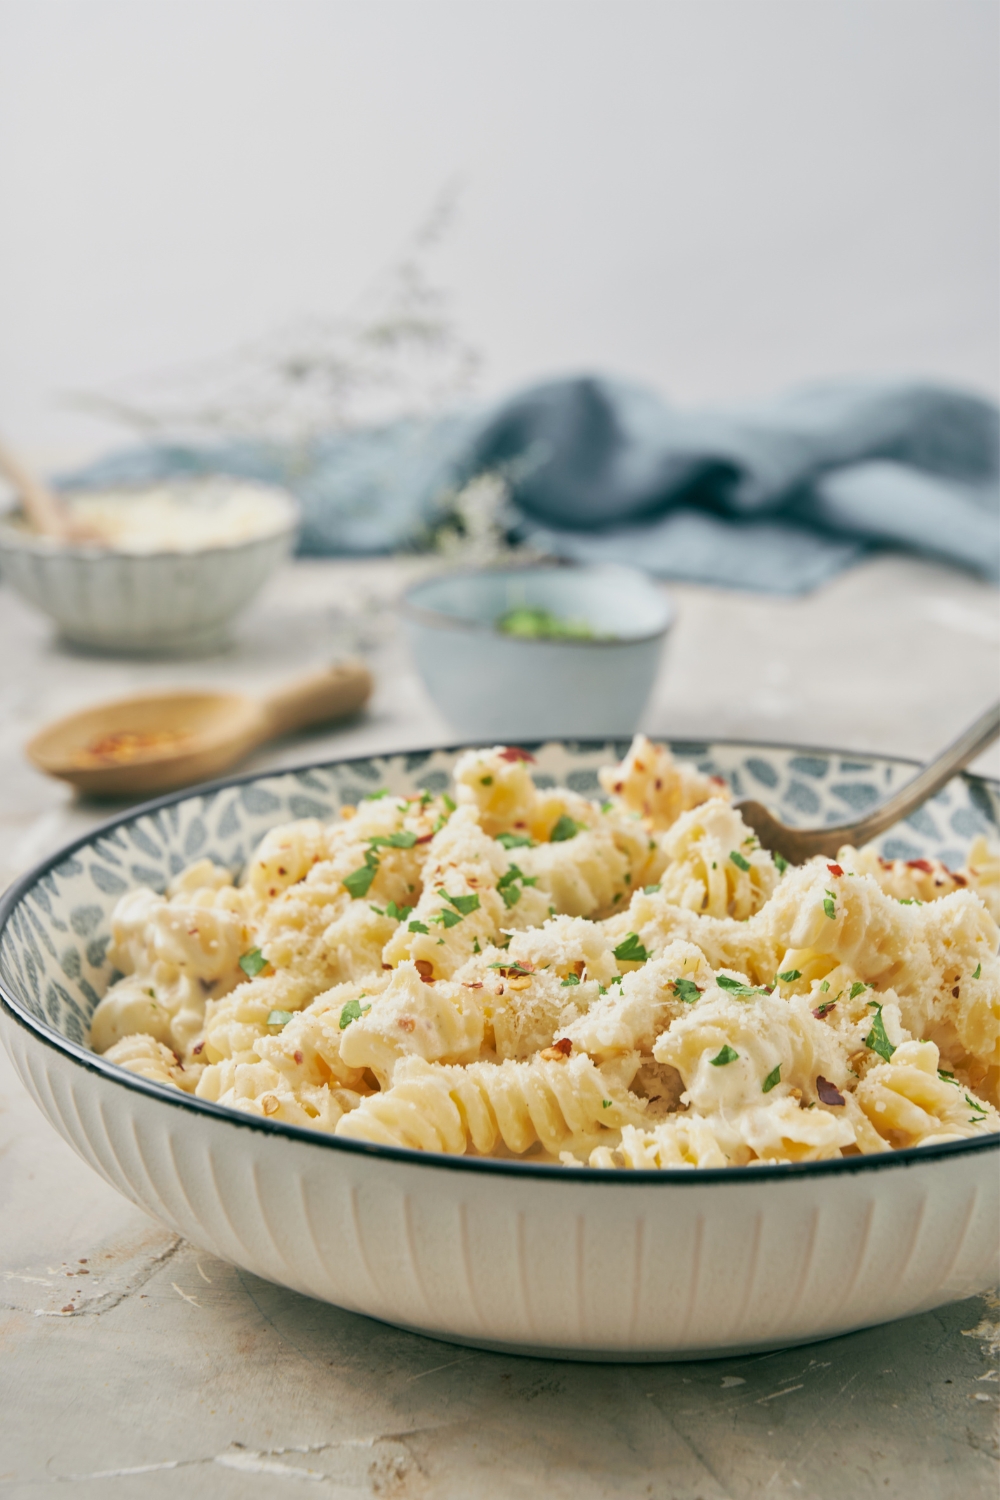 A bowl of cream cheese pasta garnished with herbs, grated parmesan, and chili flakes with a fork.